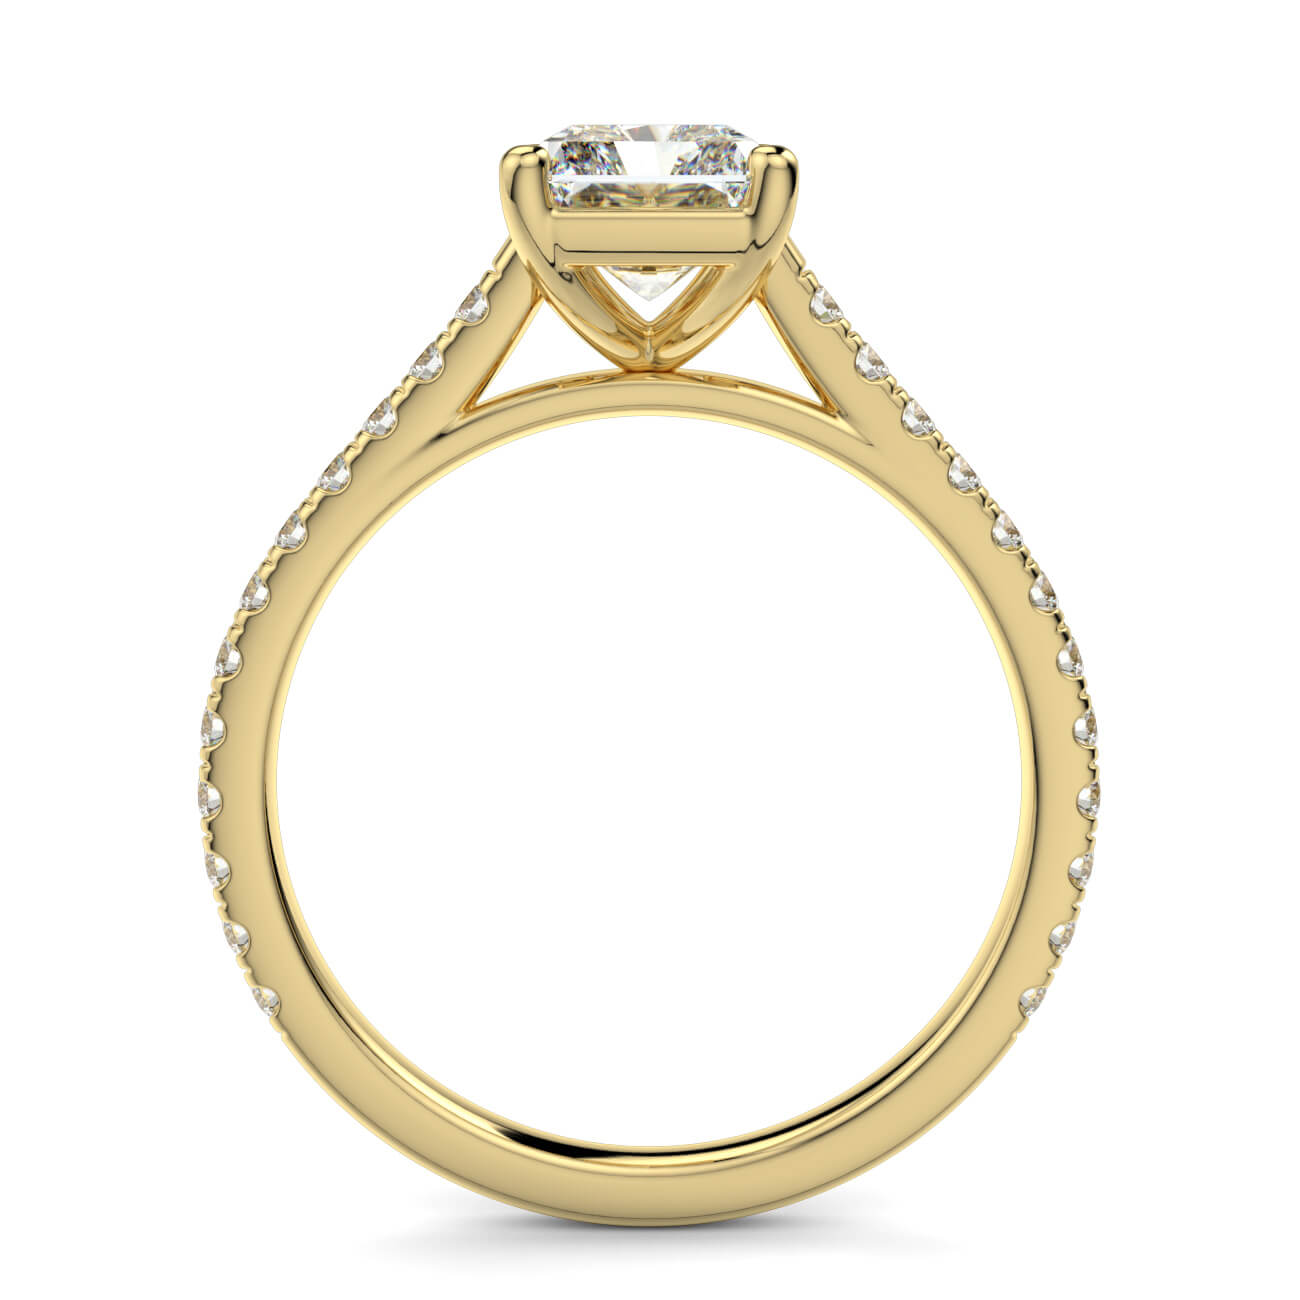 Radiant cut diamond cathedral engagement ring in yellow gold – Australian Diamond Network